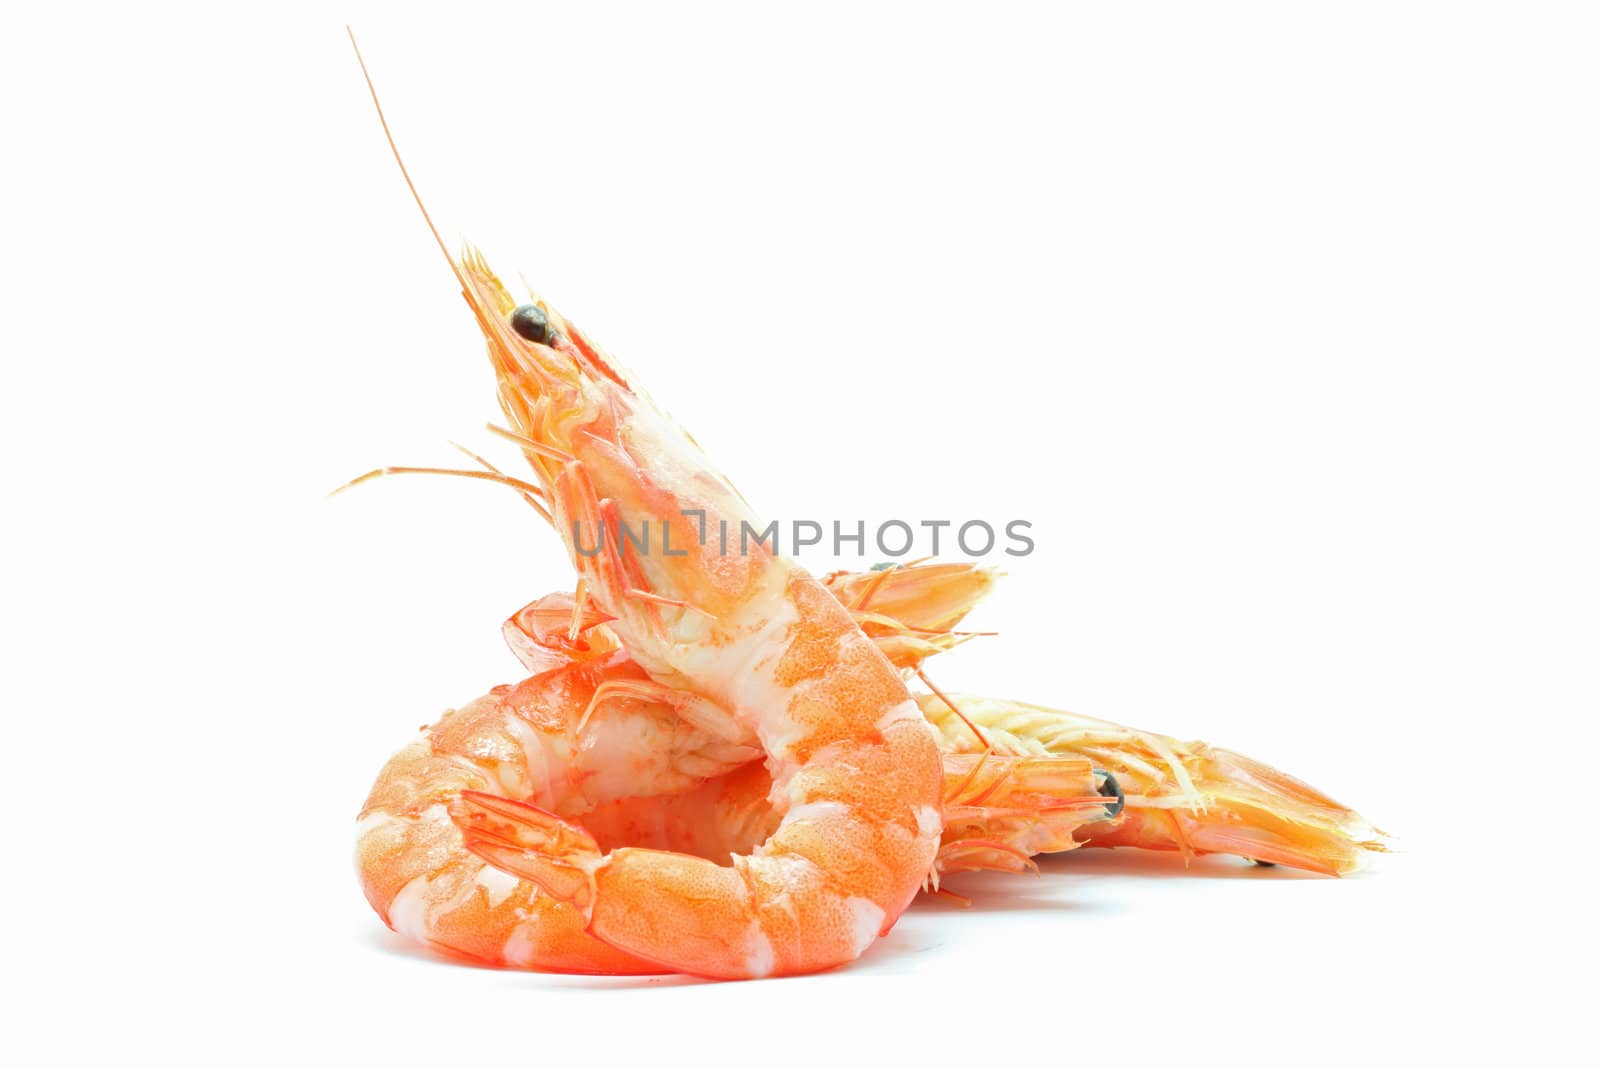 boiled Shrimp by vichie81